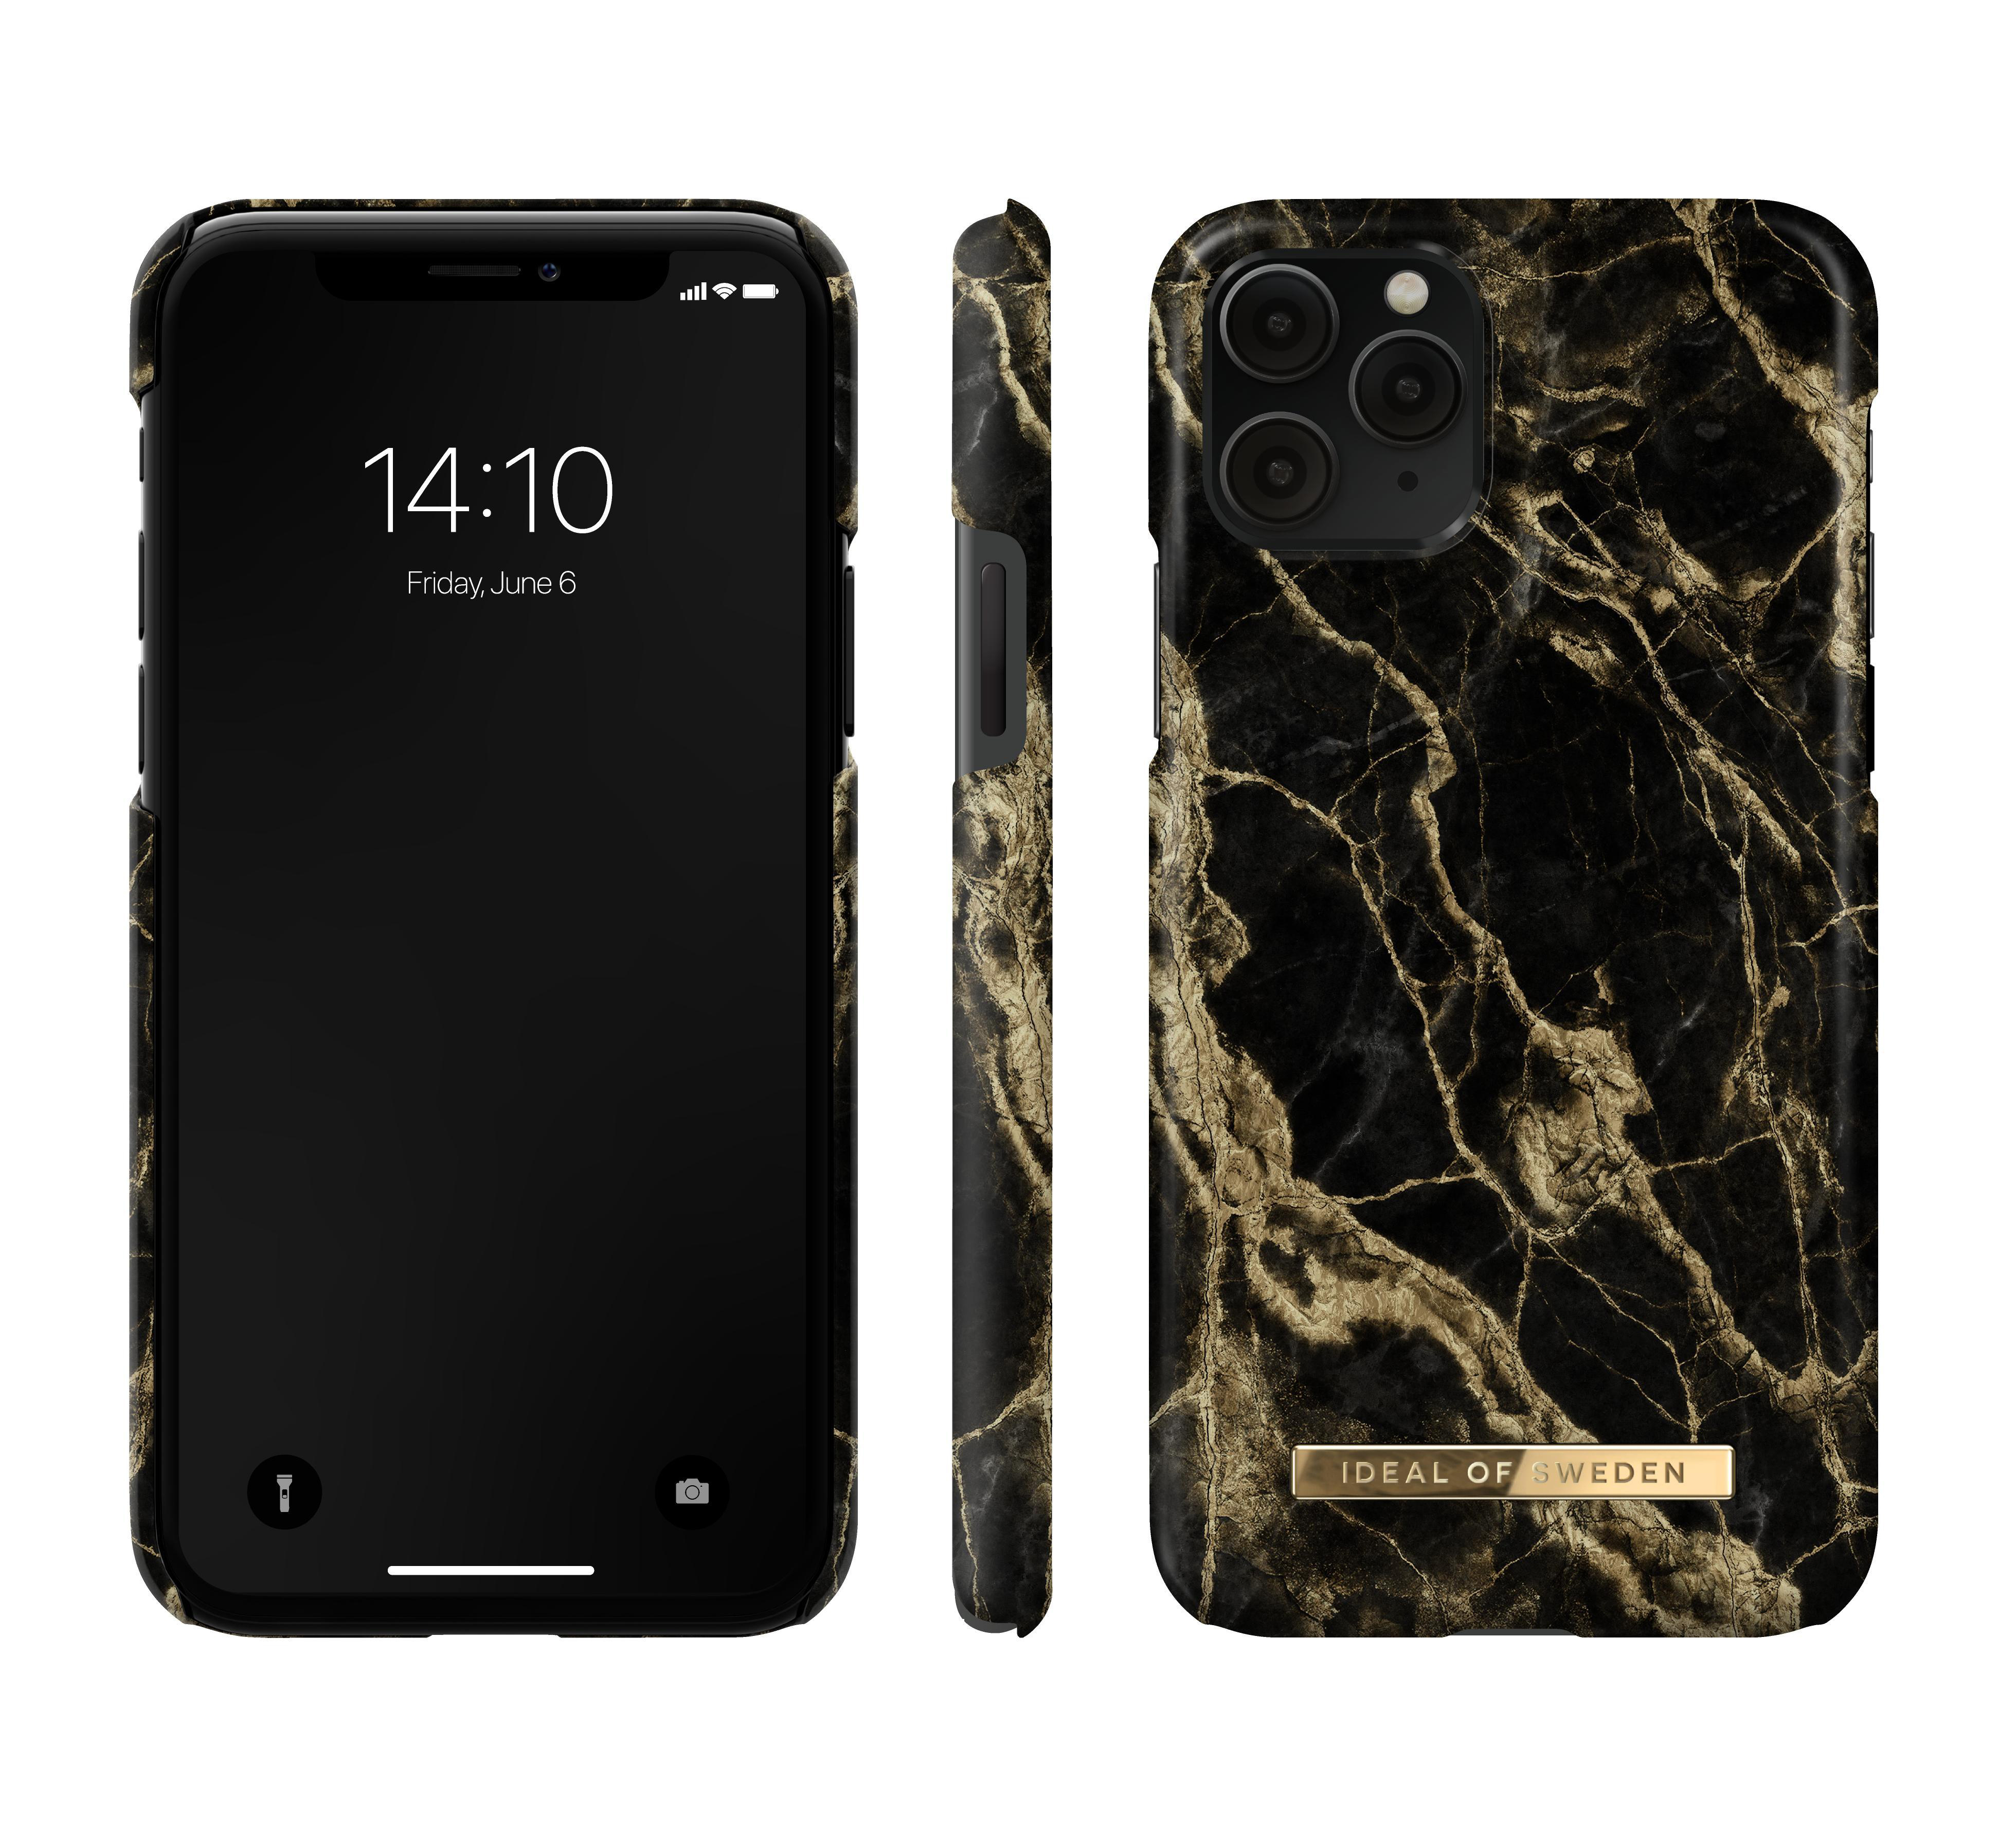 iPhone Black Pro, iPhone Backcover, X, IDEAL OF Fashion, SWEDEN Apple, 11 iPhone XS,